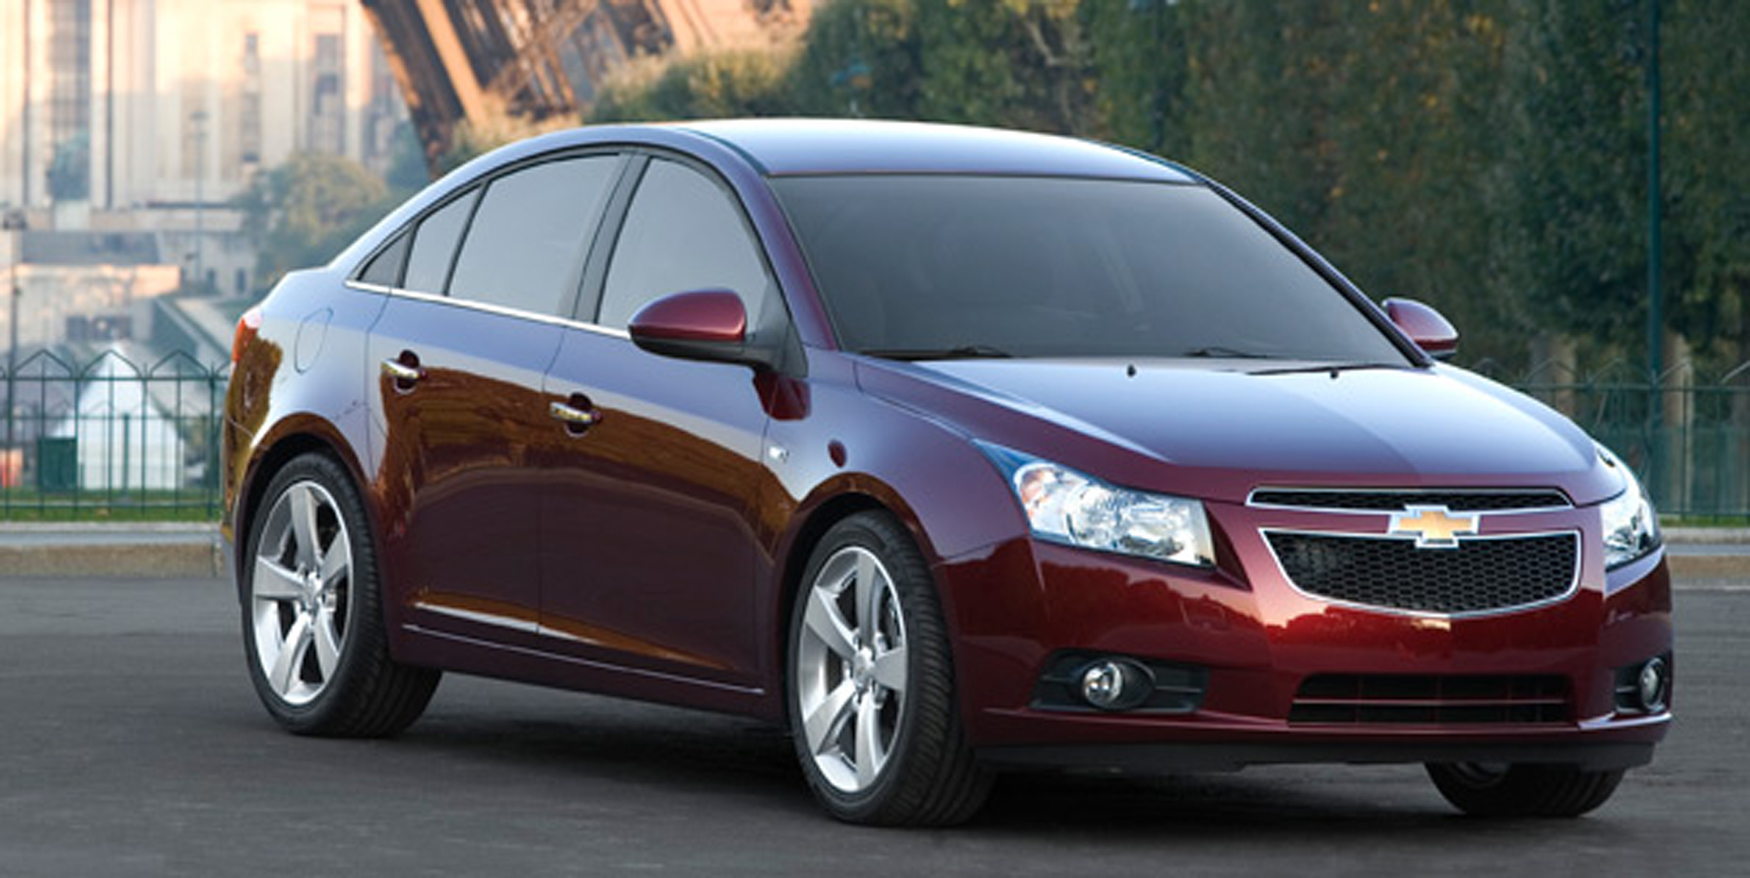 GM recalls Chevy Cruze for steering shaft problem The Blade